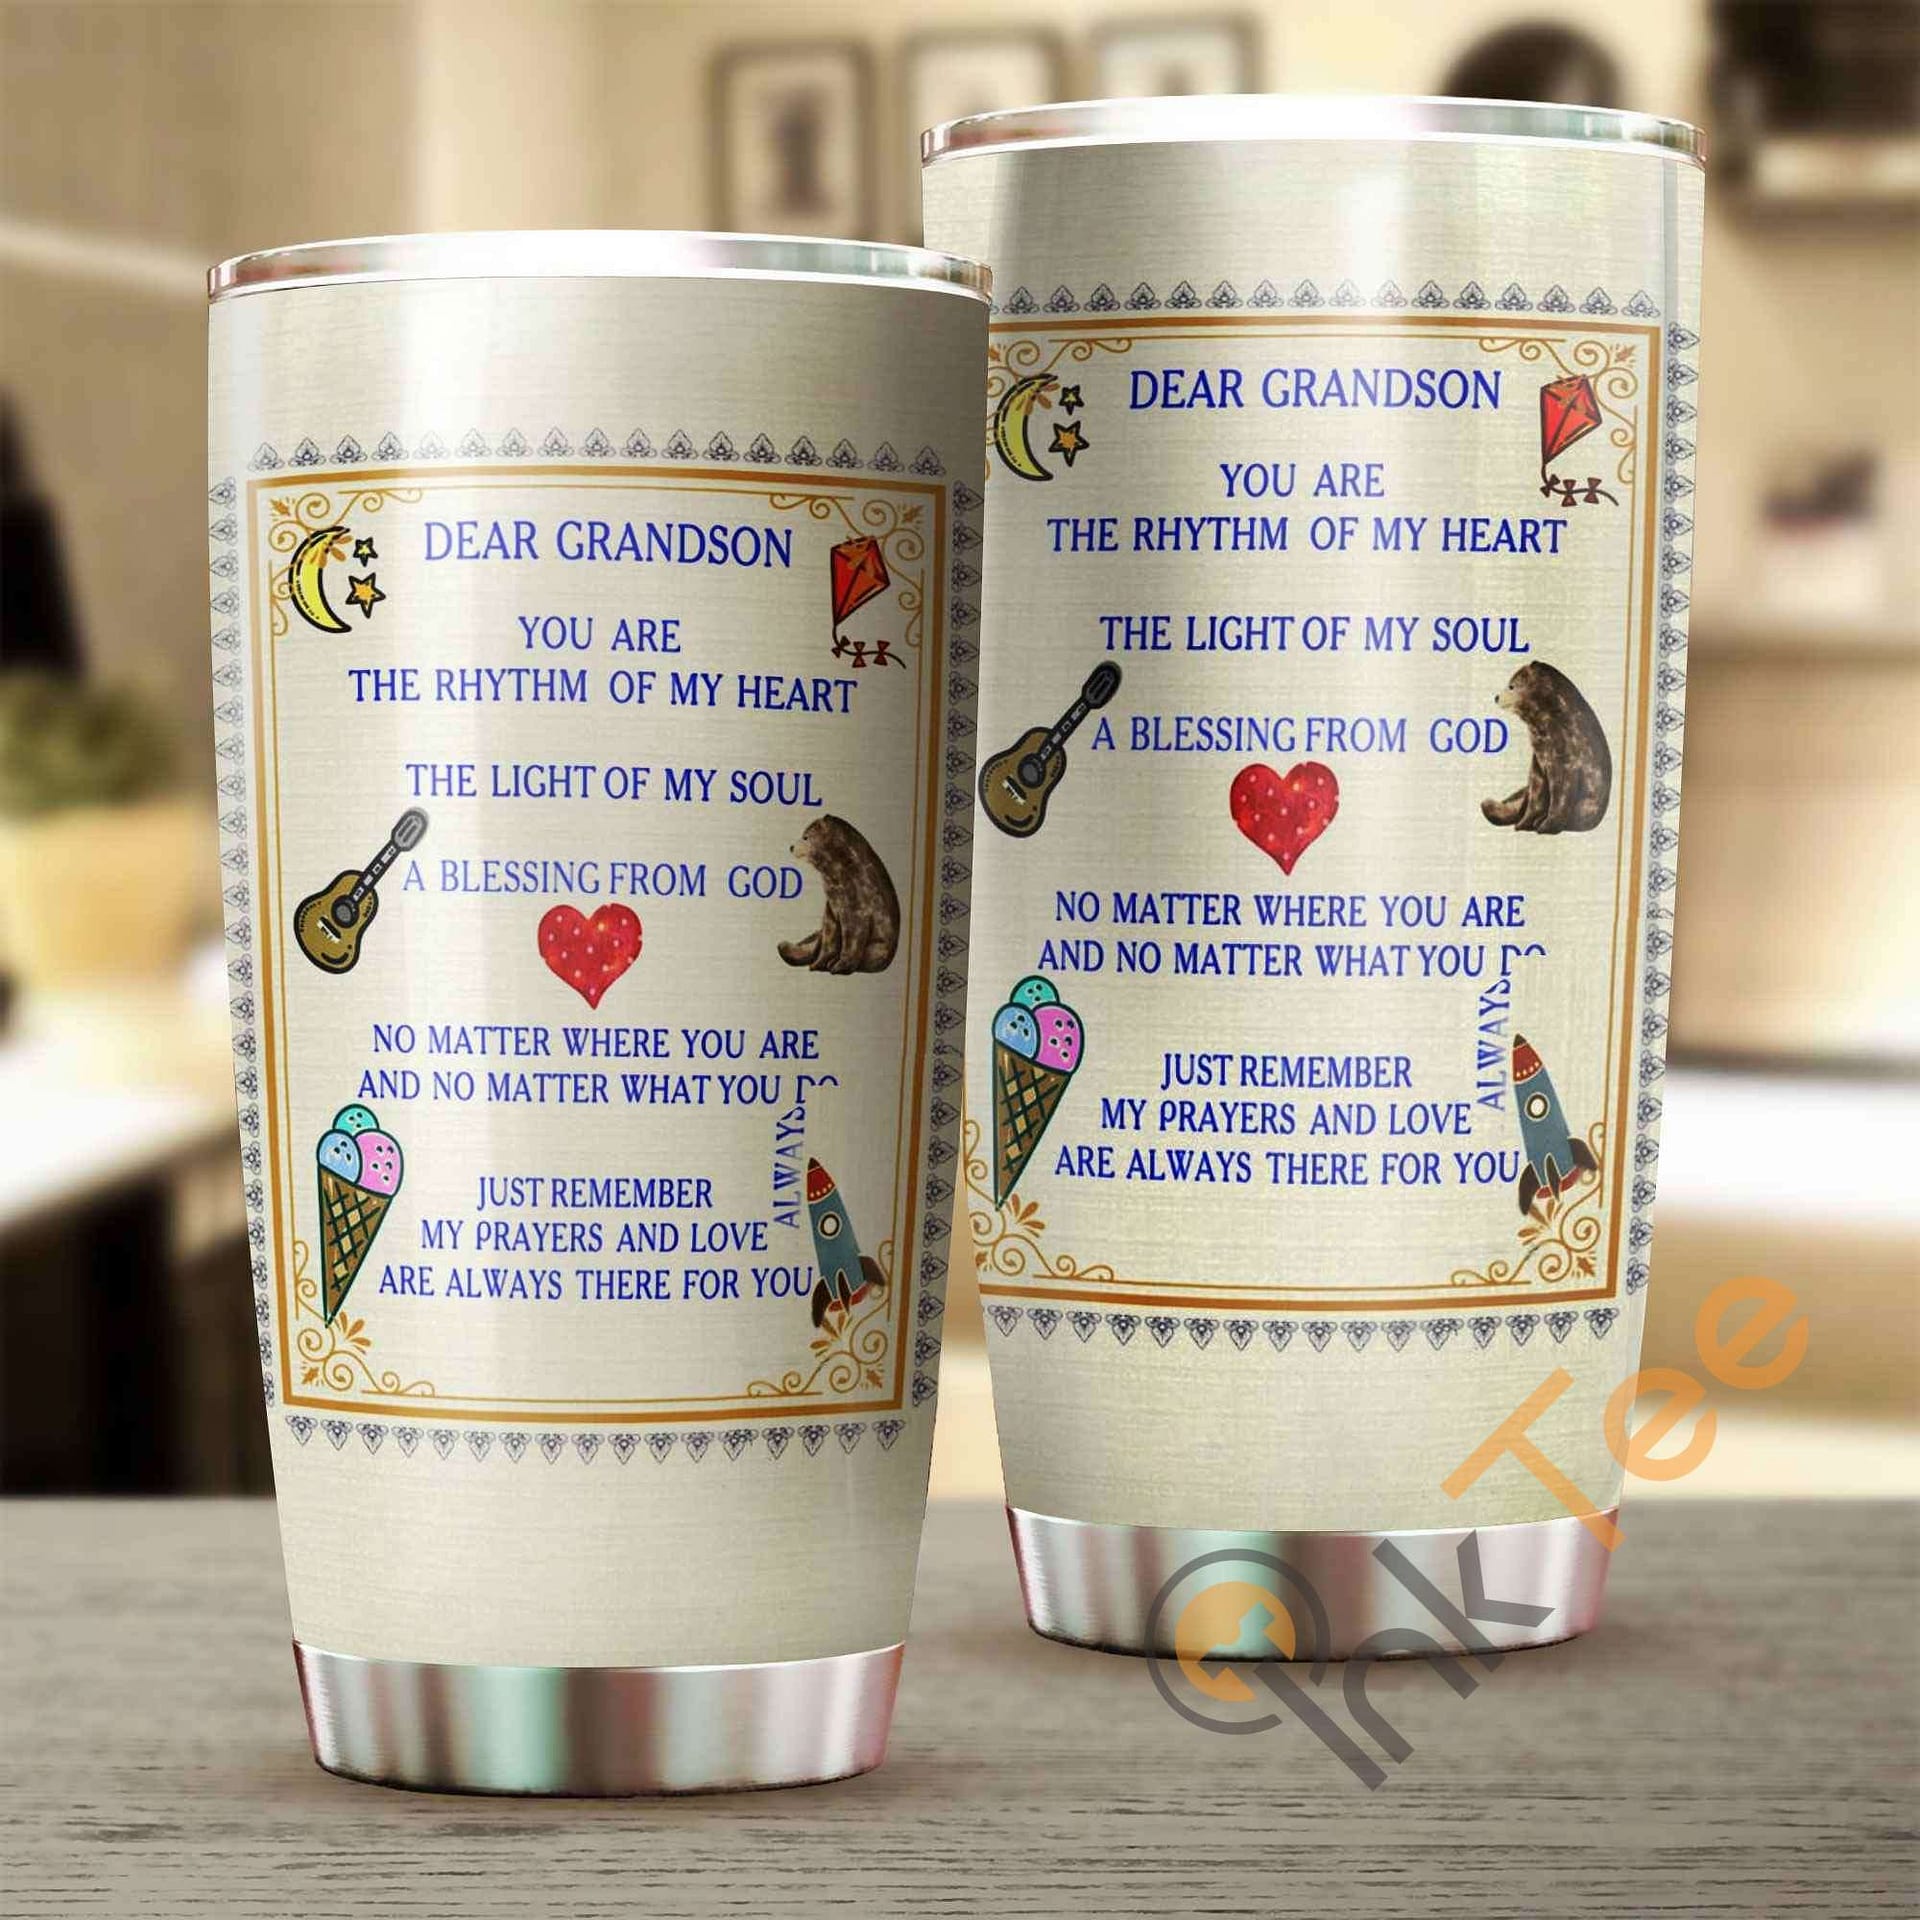 Dear Grandson You Are The Rhythm Of My Heart Amazon Best Seller Sku 2557 Stainless Steel Tumbler